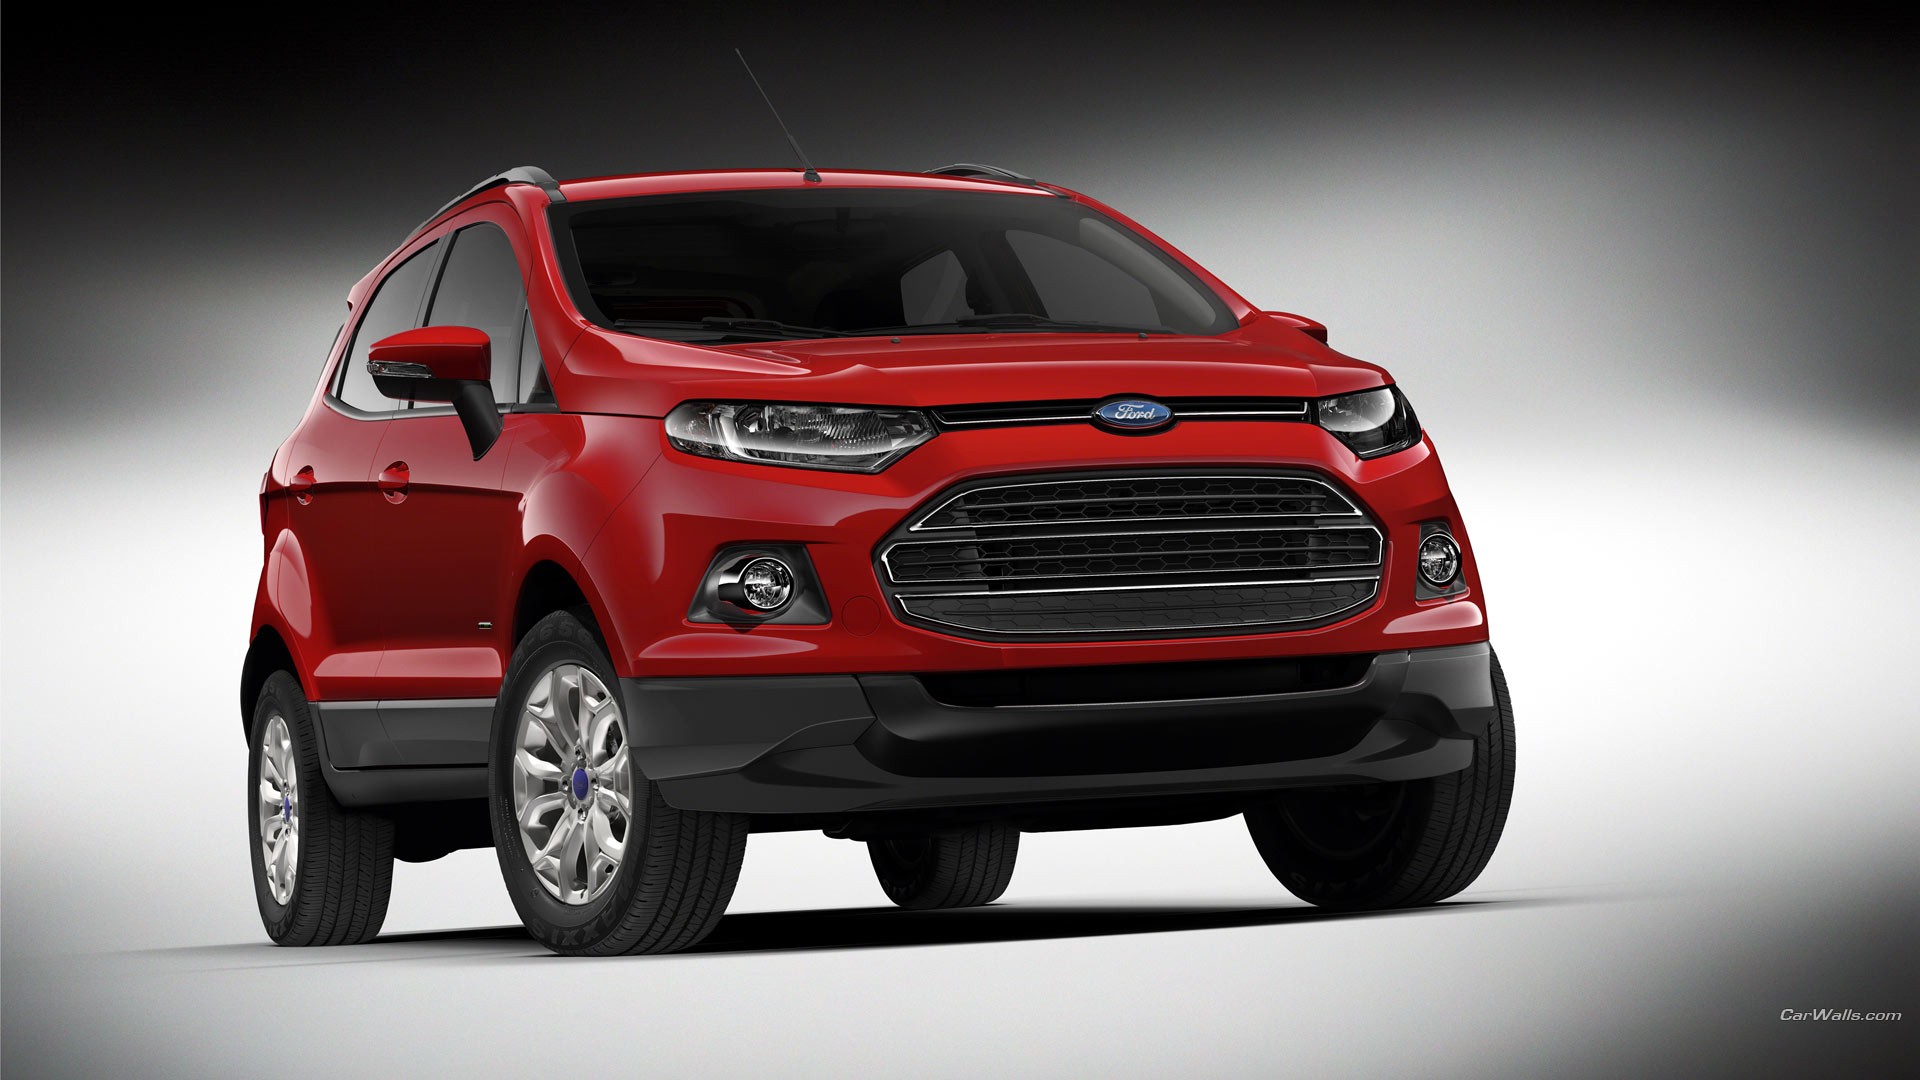 General 1920x1080 Ford EcoSport Ford car red cars vehicle SUV Brazilian cars